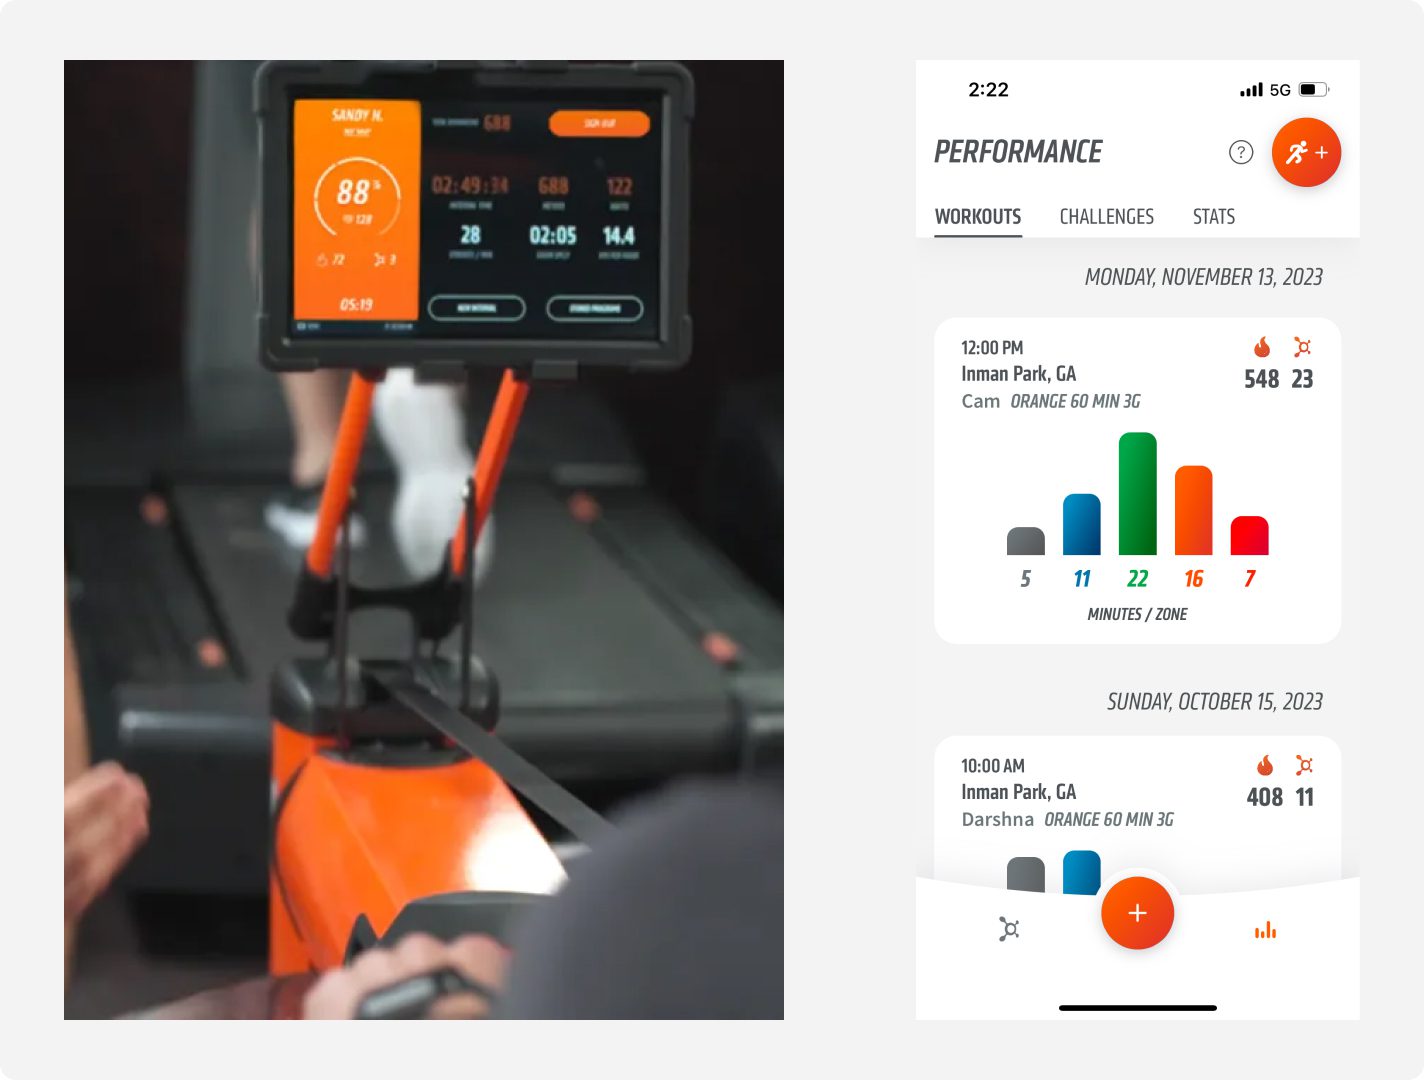 An image of an Orange Theory workout machine showing a screen from the perspective of the user, and a screenshot of the Orange Theory app Performance feature. 